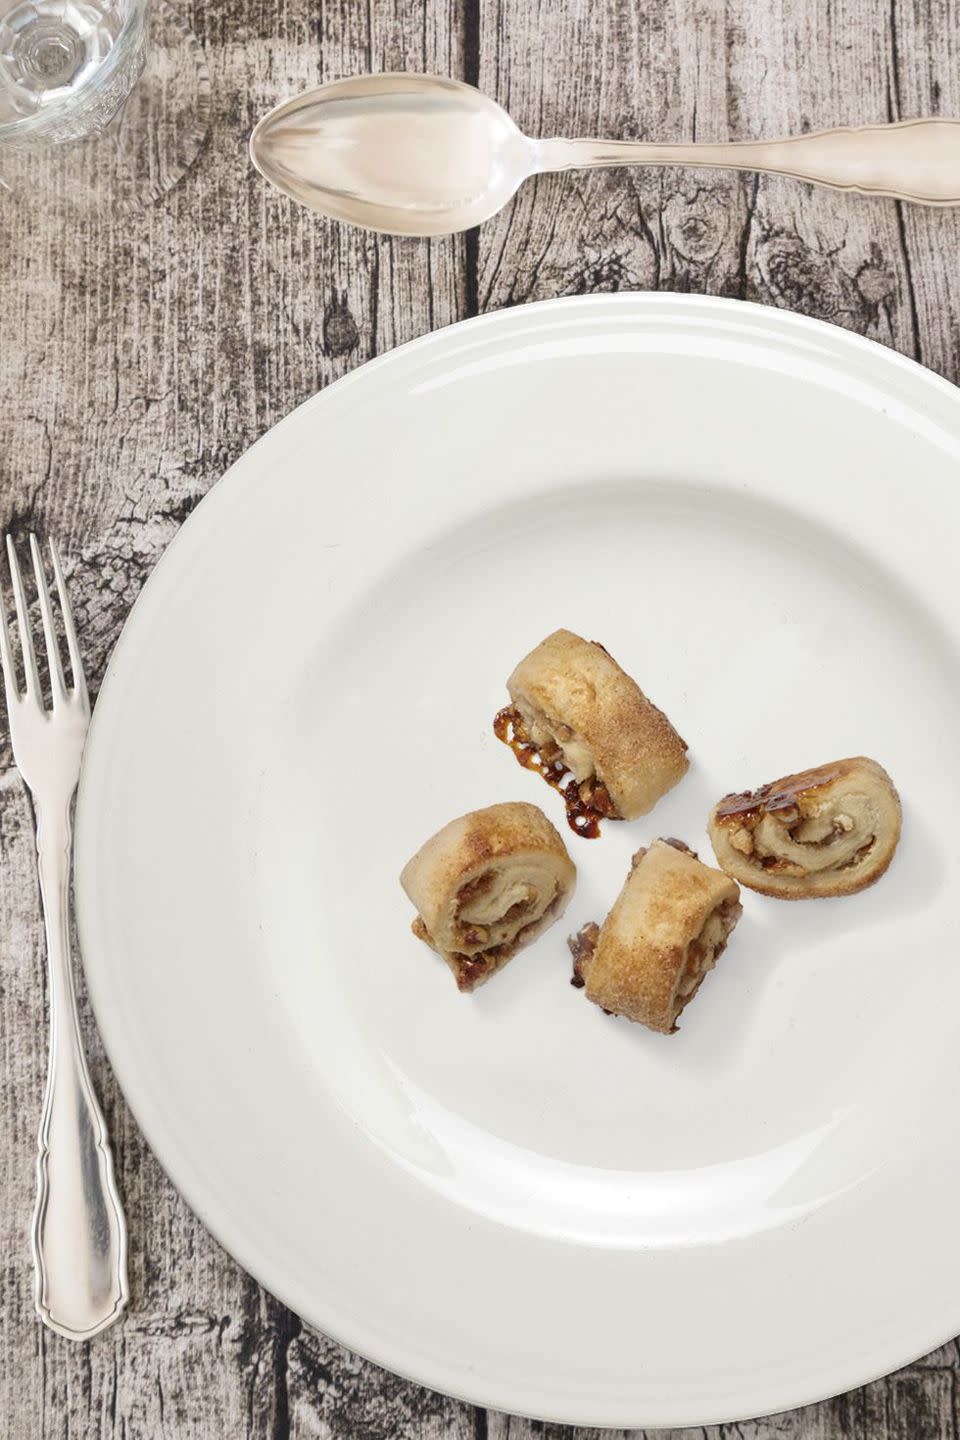 Pecan-Apricot Rugelach